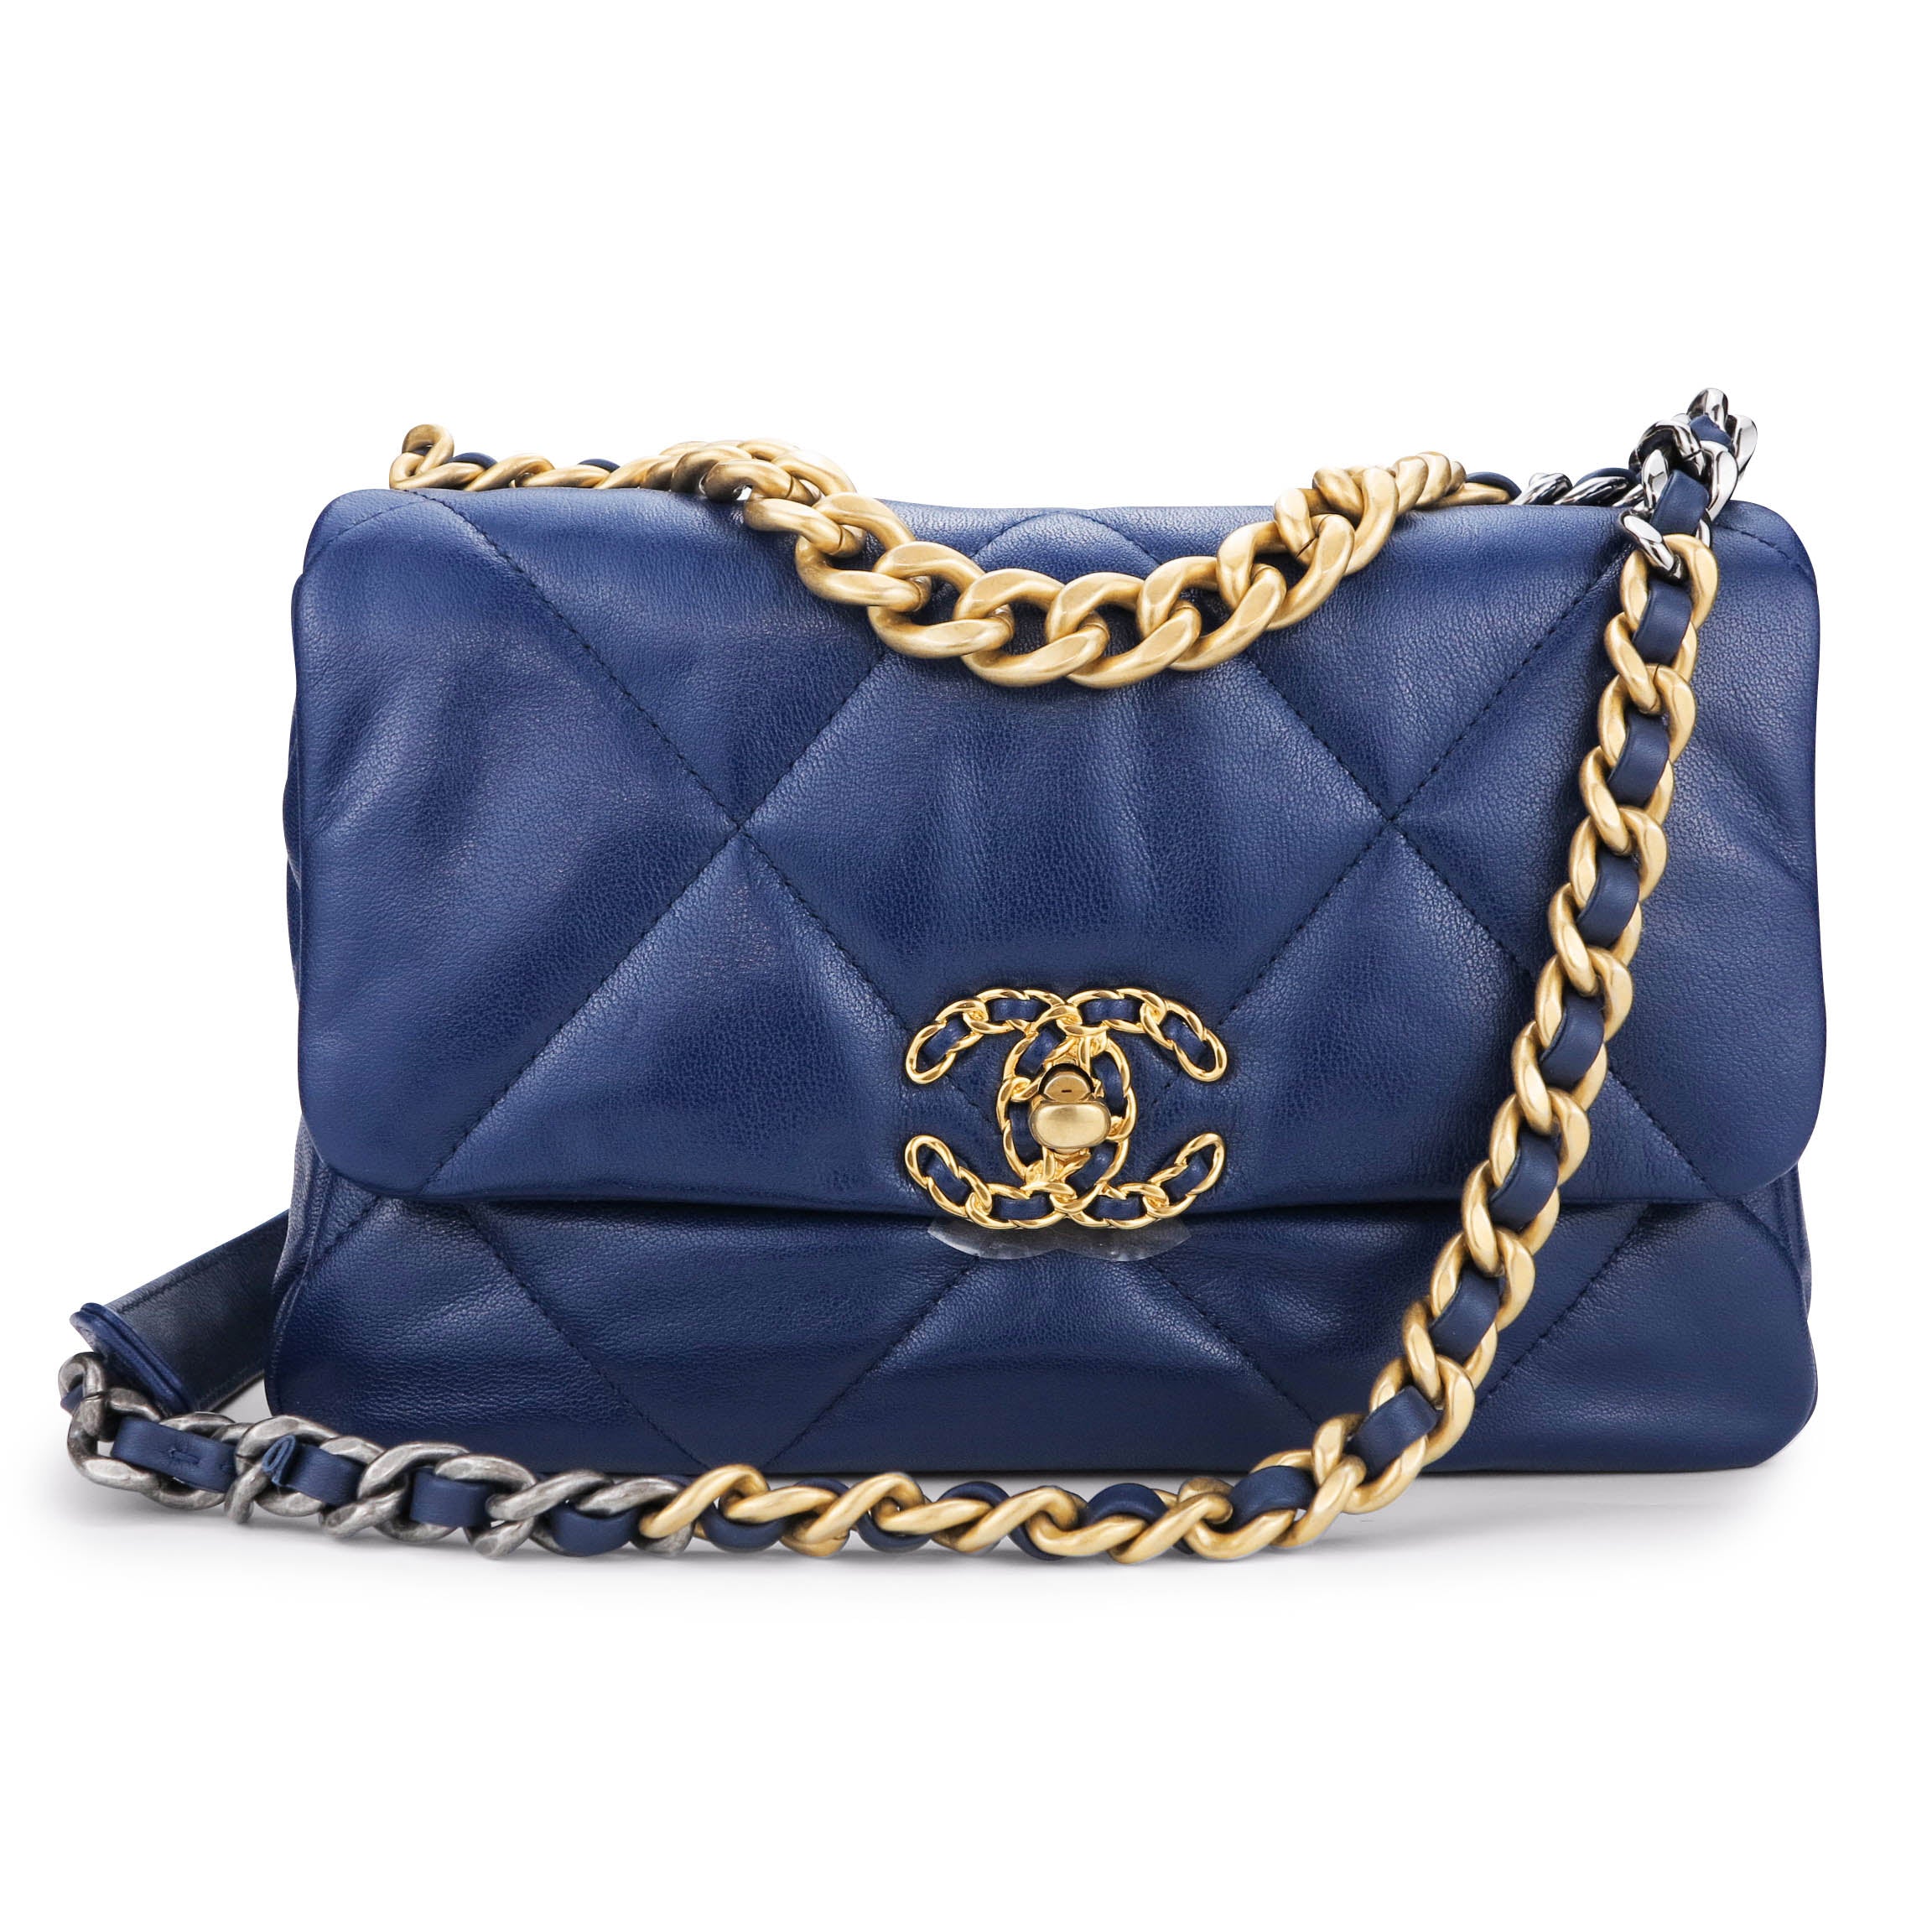 Chanel 19 Large, 21S Navy Blue Lambskin Leather, Preowned in Box WA001 -  Julia Rose Boston